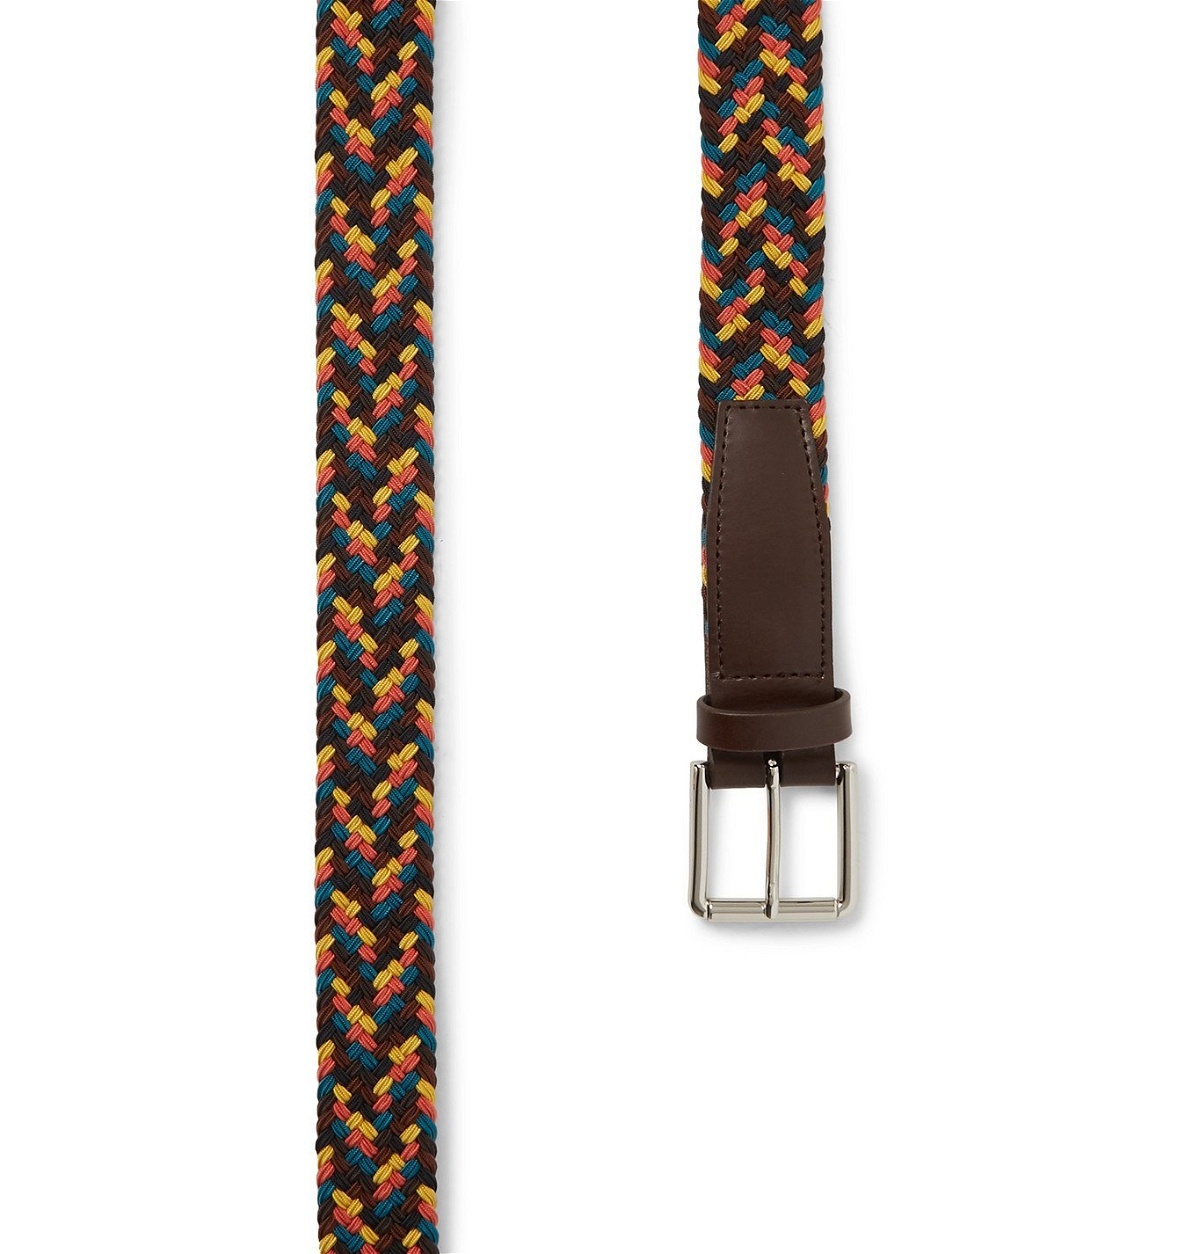 Paul Smith - 3cm Leather-Trimmed Woven Cord Belt - Multi Paul Smith